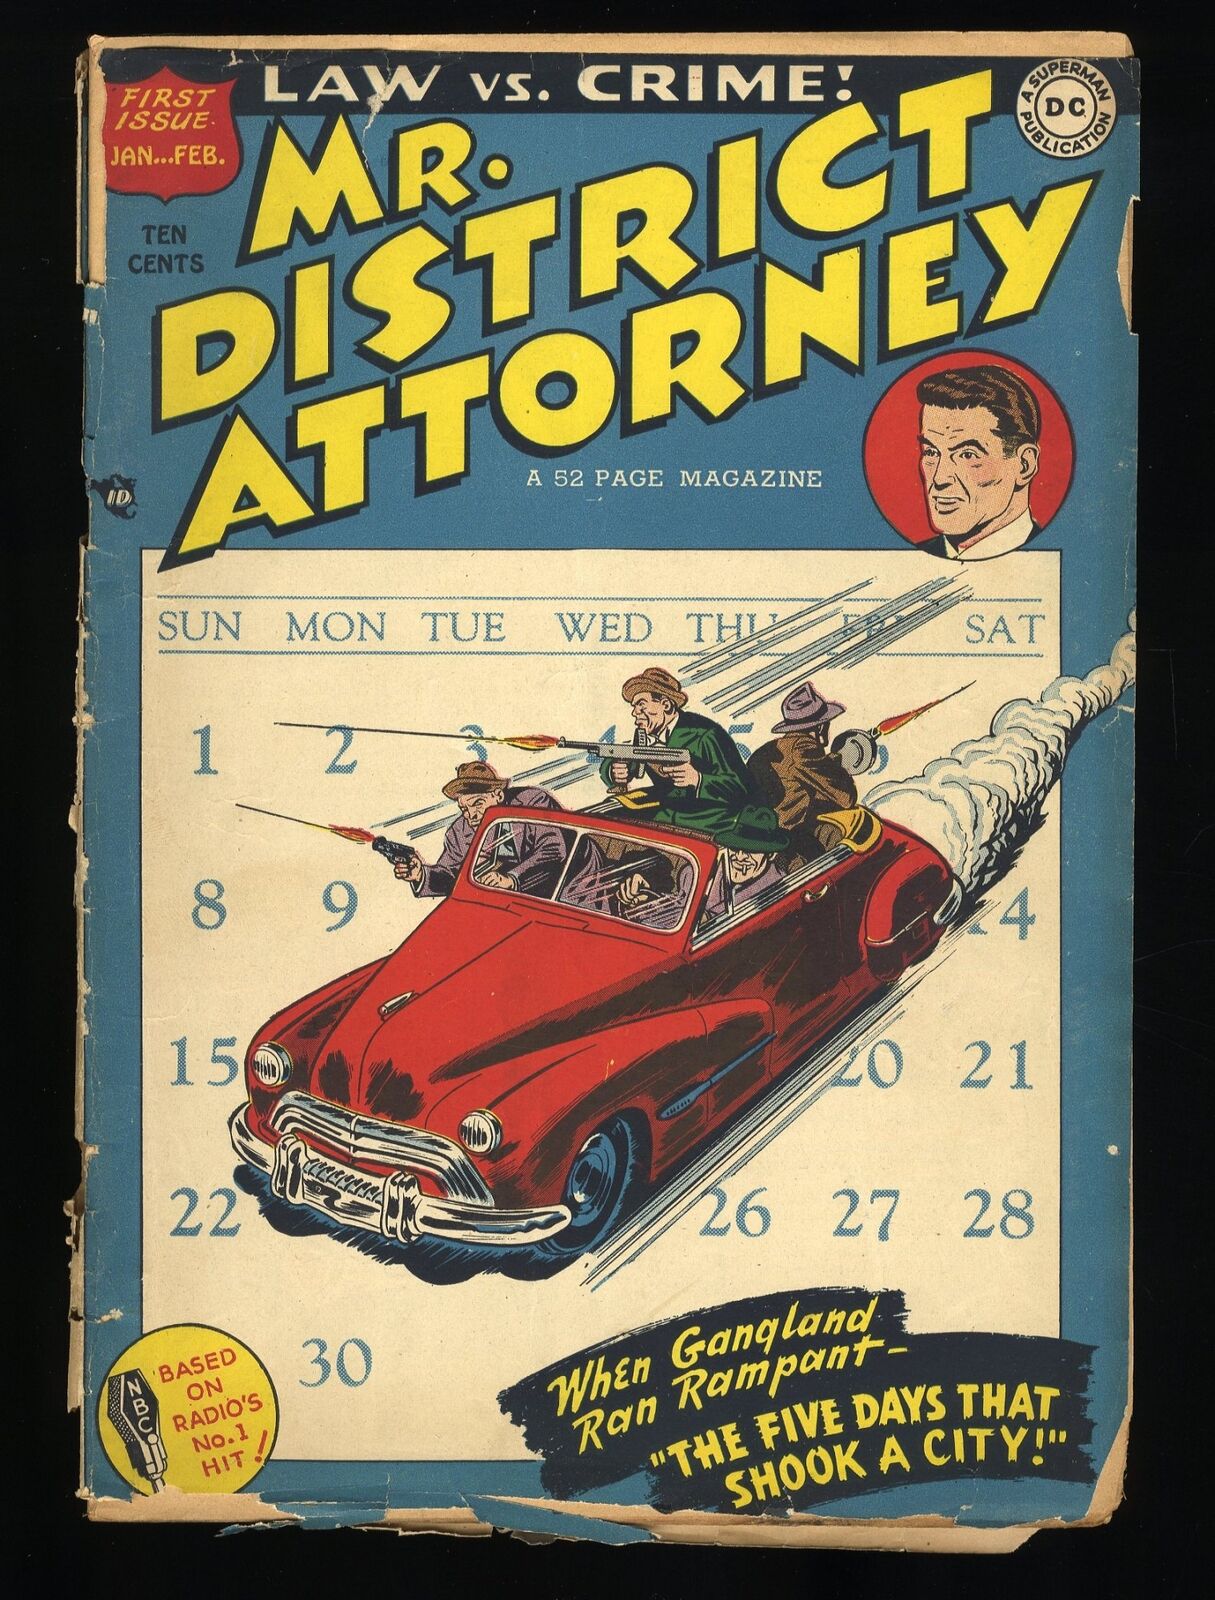 Mr. District Attorney (1948) #1 FA/GD 1.5 Very Scarce 1st Issue DC Comics 1948